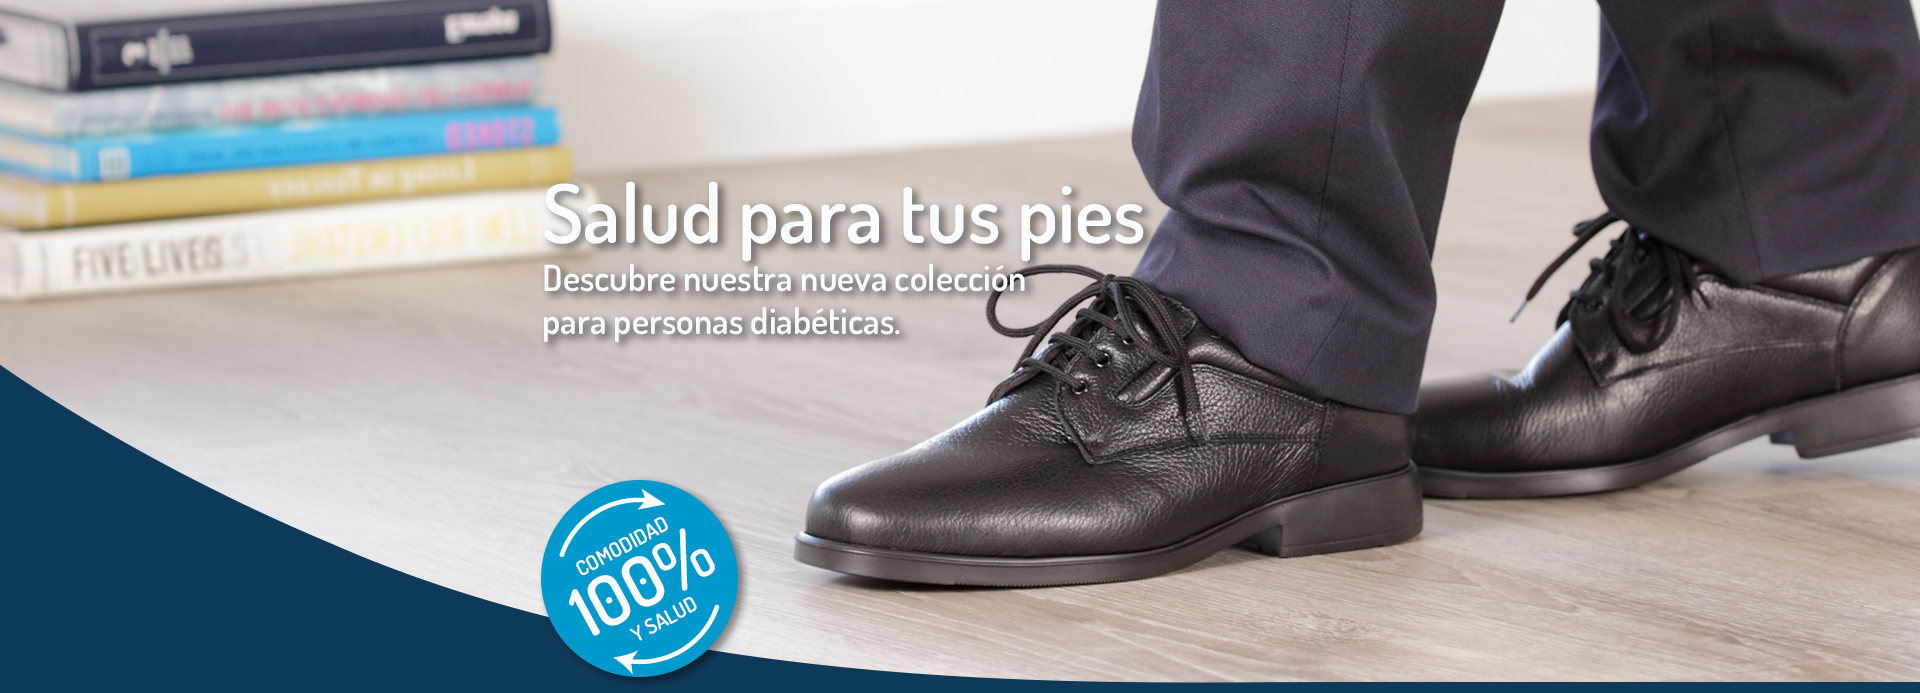 slider-mabel-shoes-2-texto